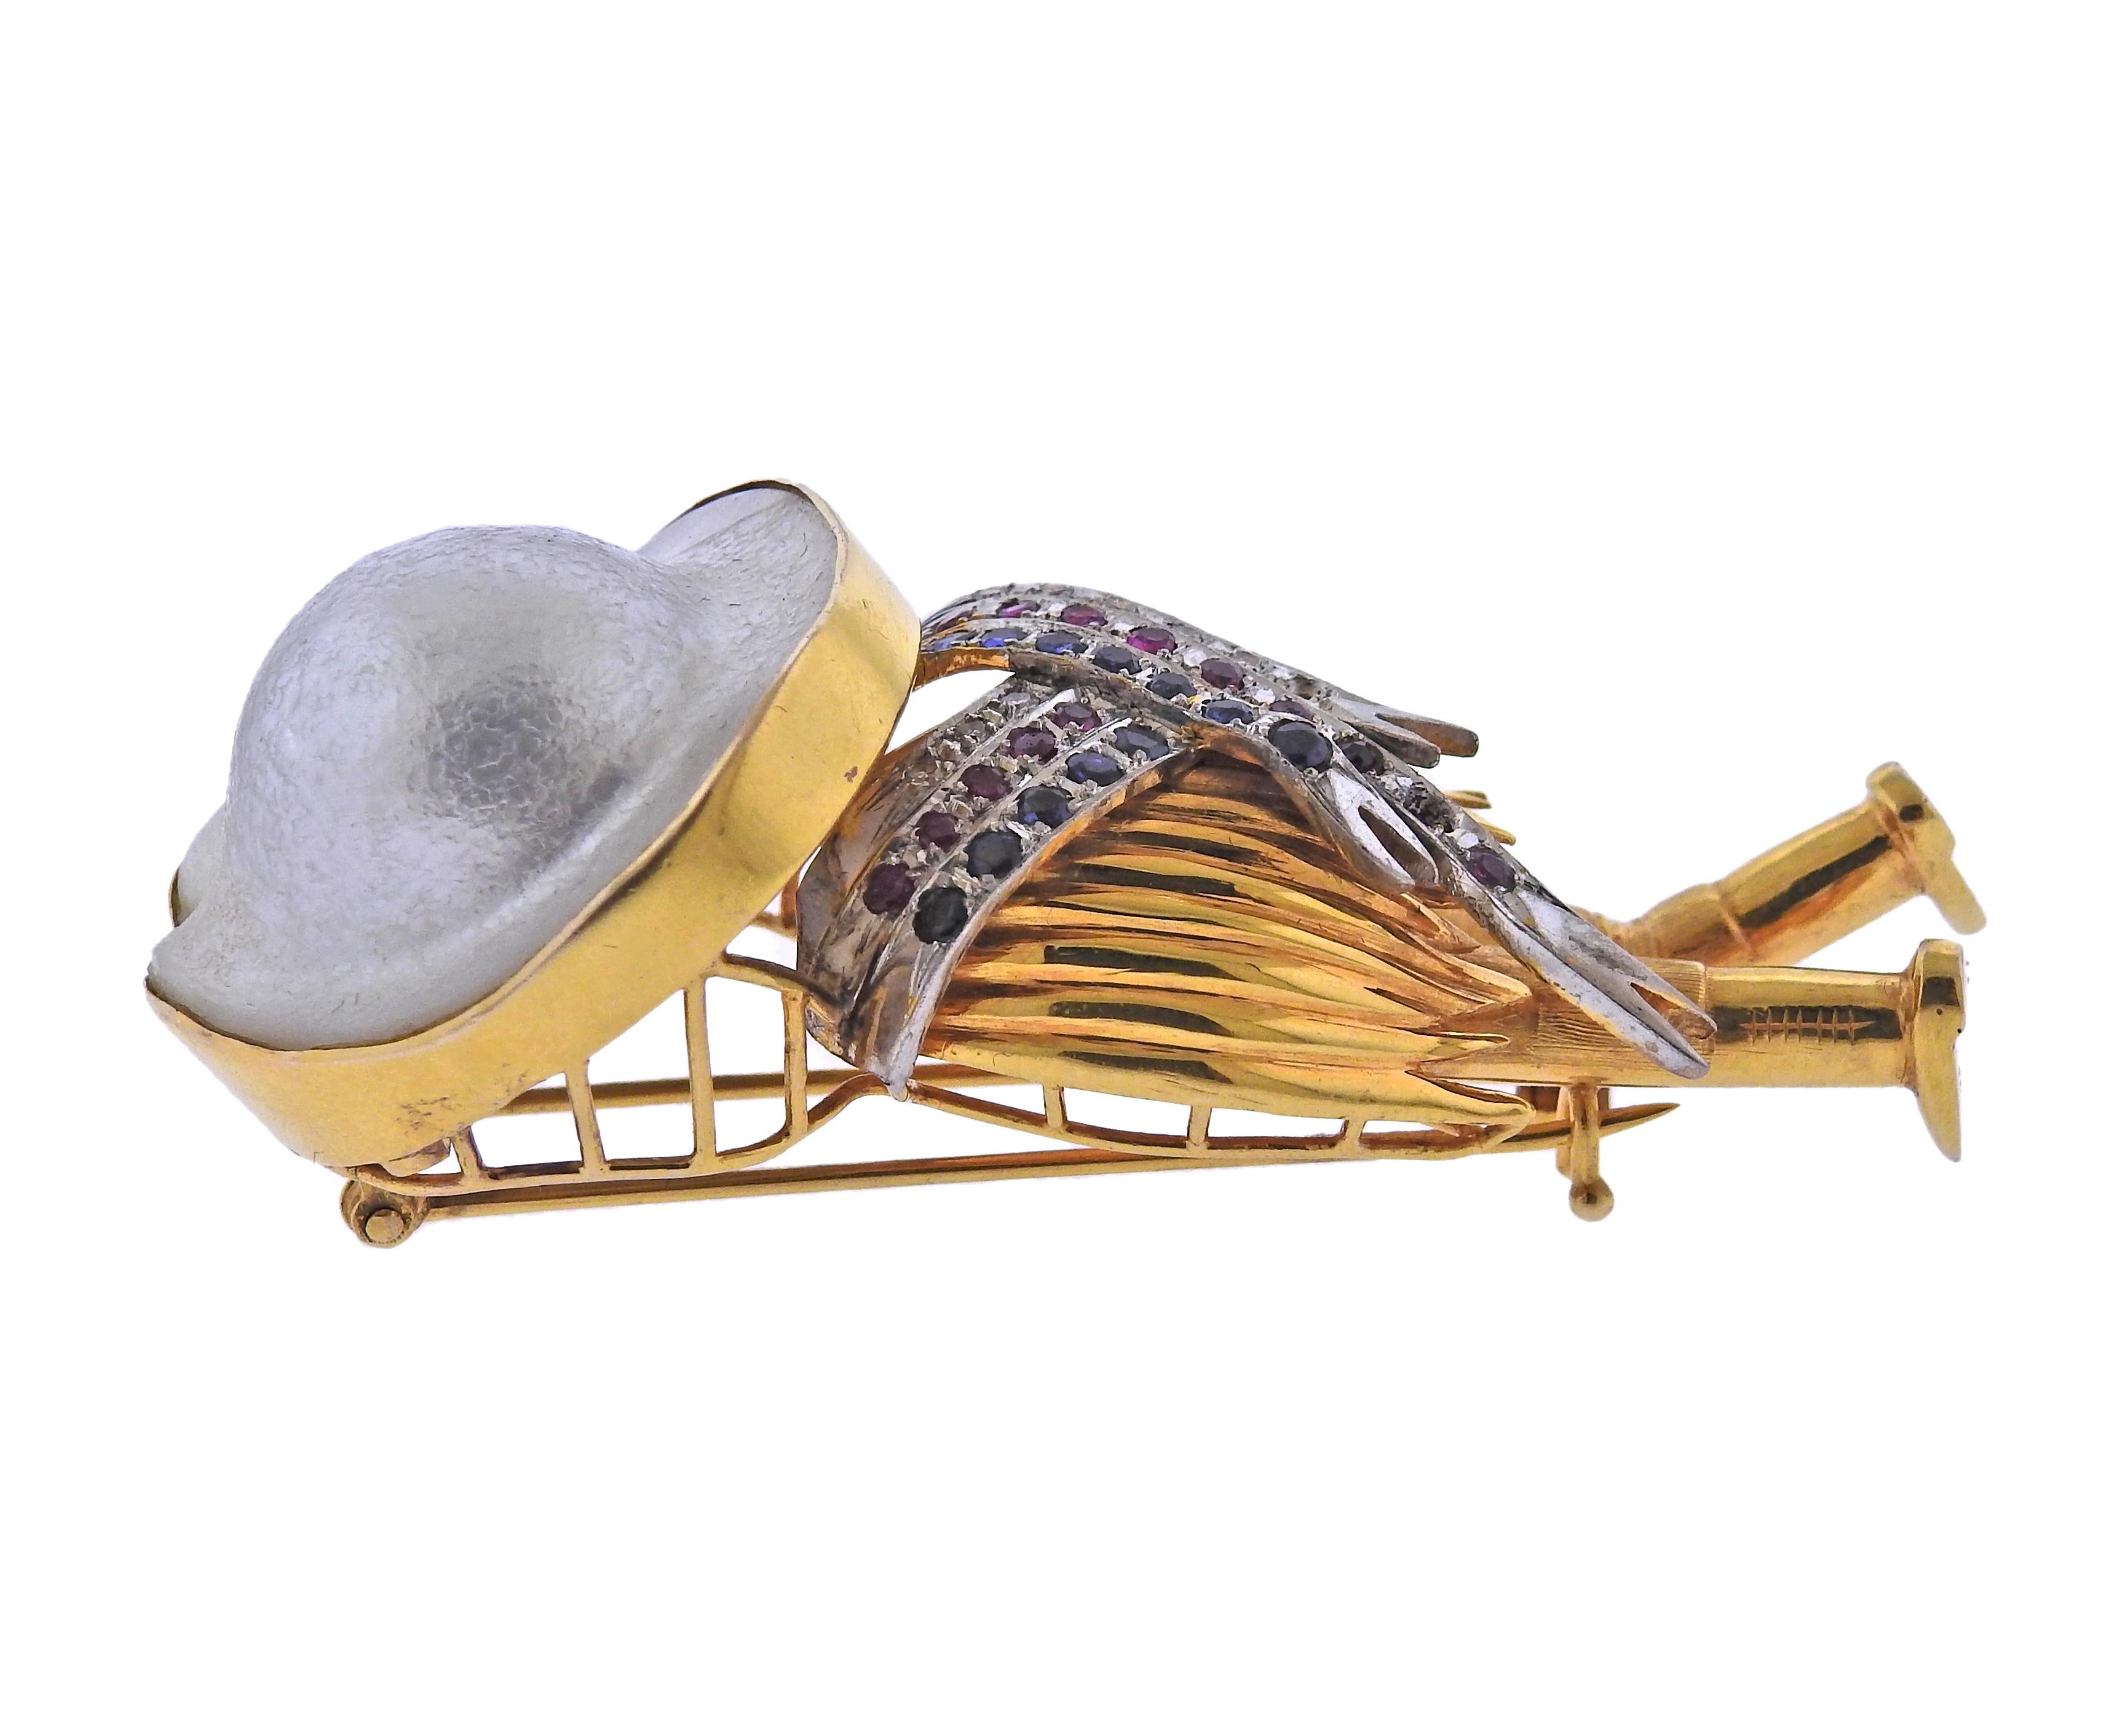 14k gold brooch, depicting a man in sombrero hat, with 28mm blister pearl, rubies, sapphires and diamonds (1 is missing). Brooch measures 65mm x 30mm. Tested 14k. Weight - 31.8 grams.